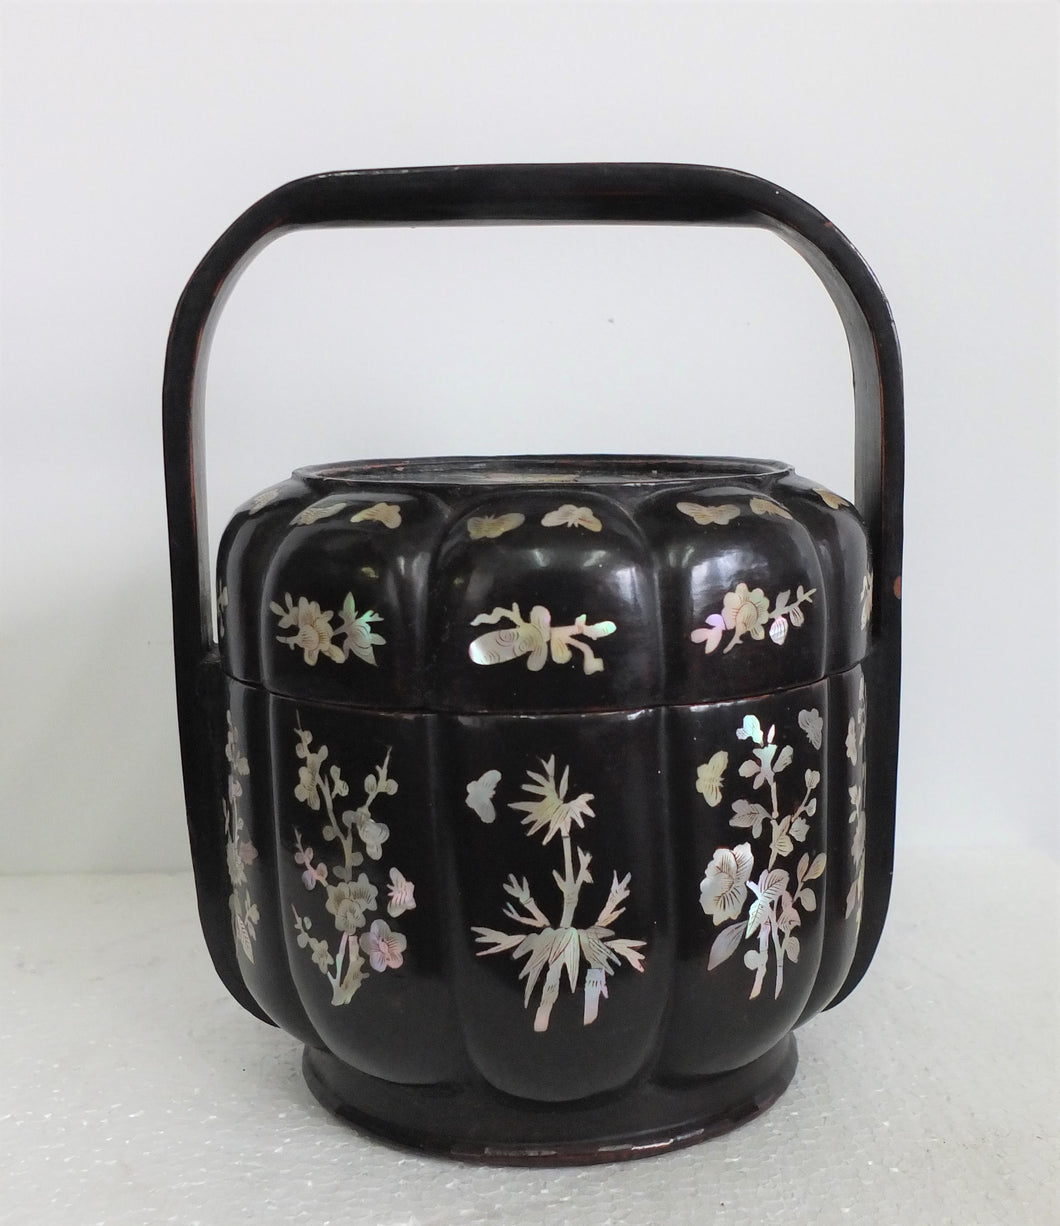 Basket: Antique Black Lacquer Basket with Mother of Pearl Inlaid Flowers